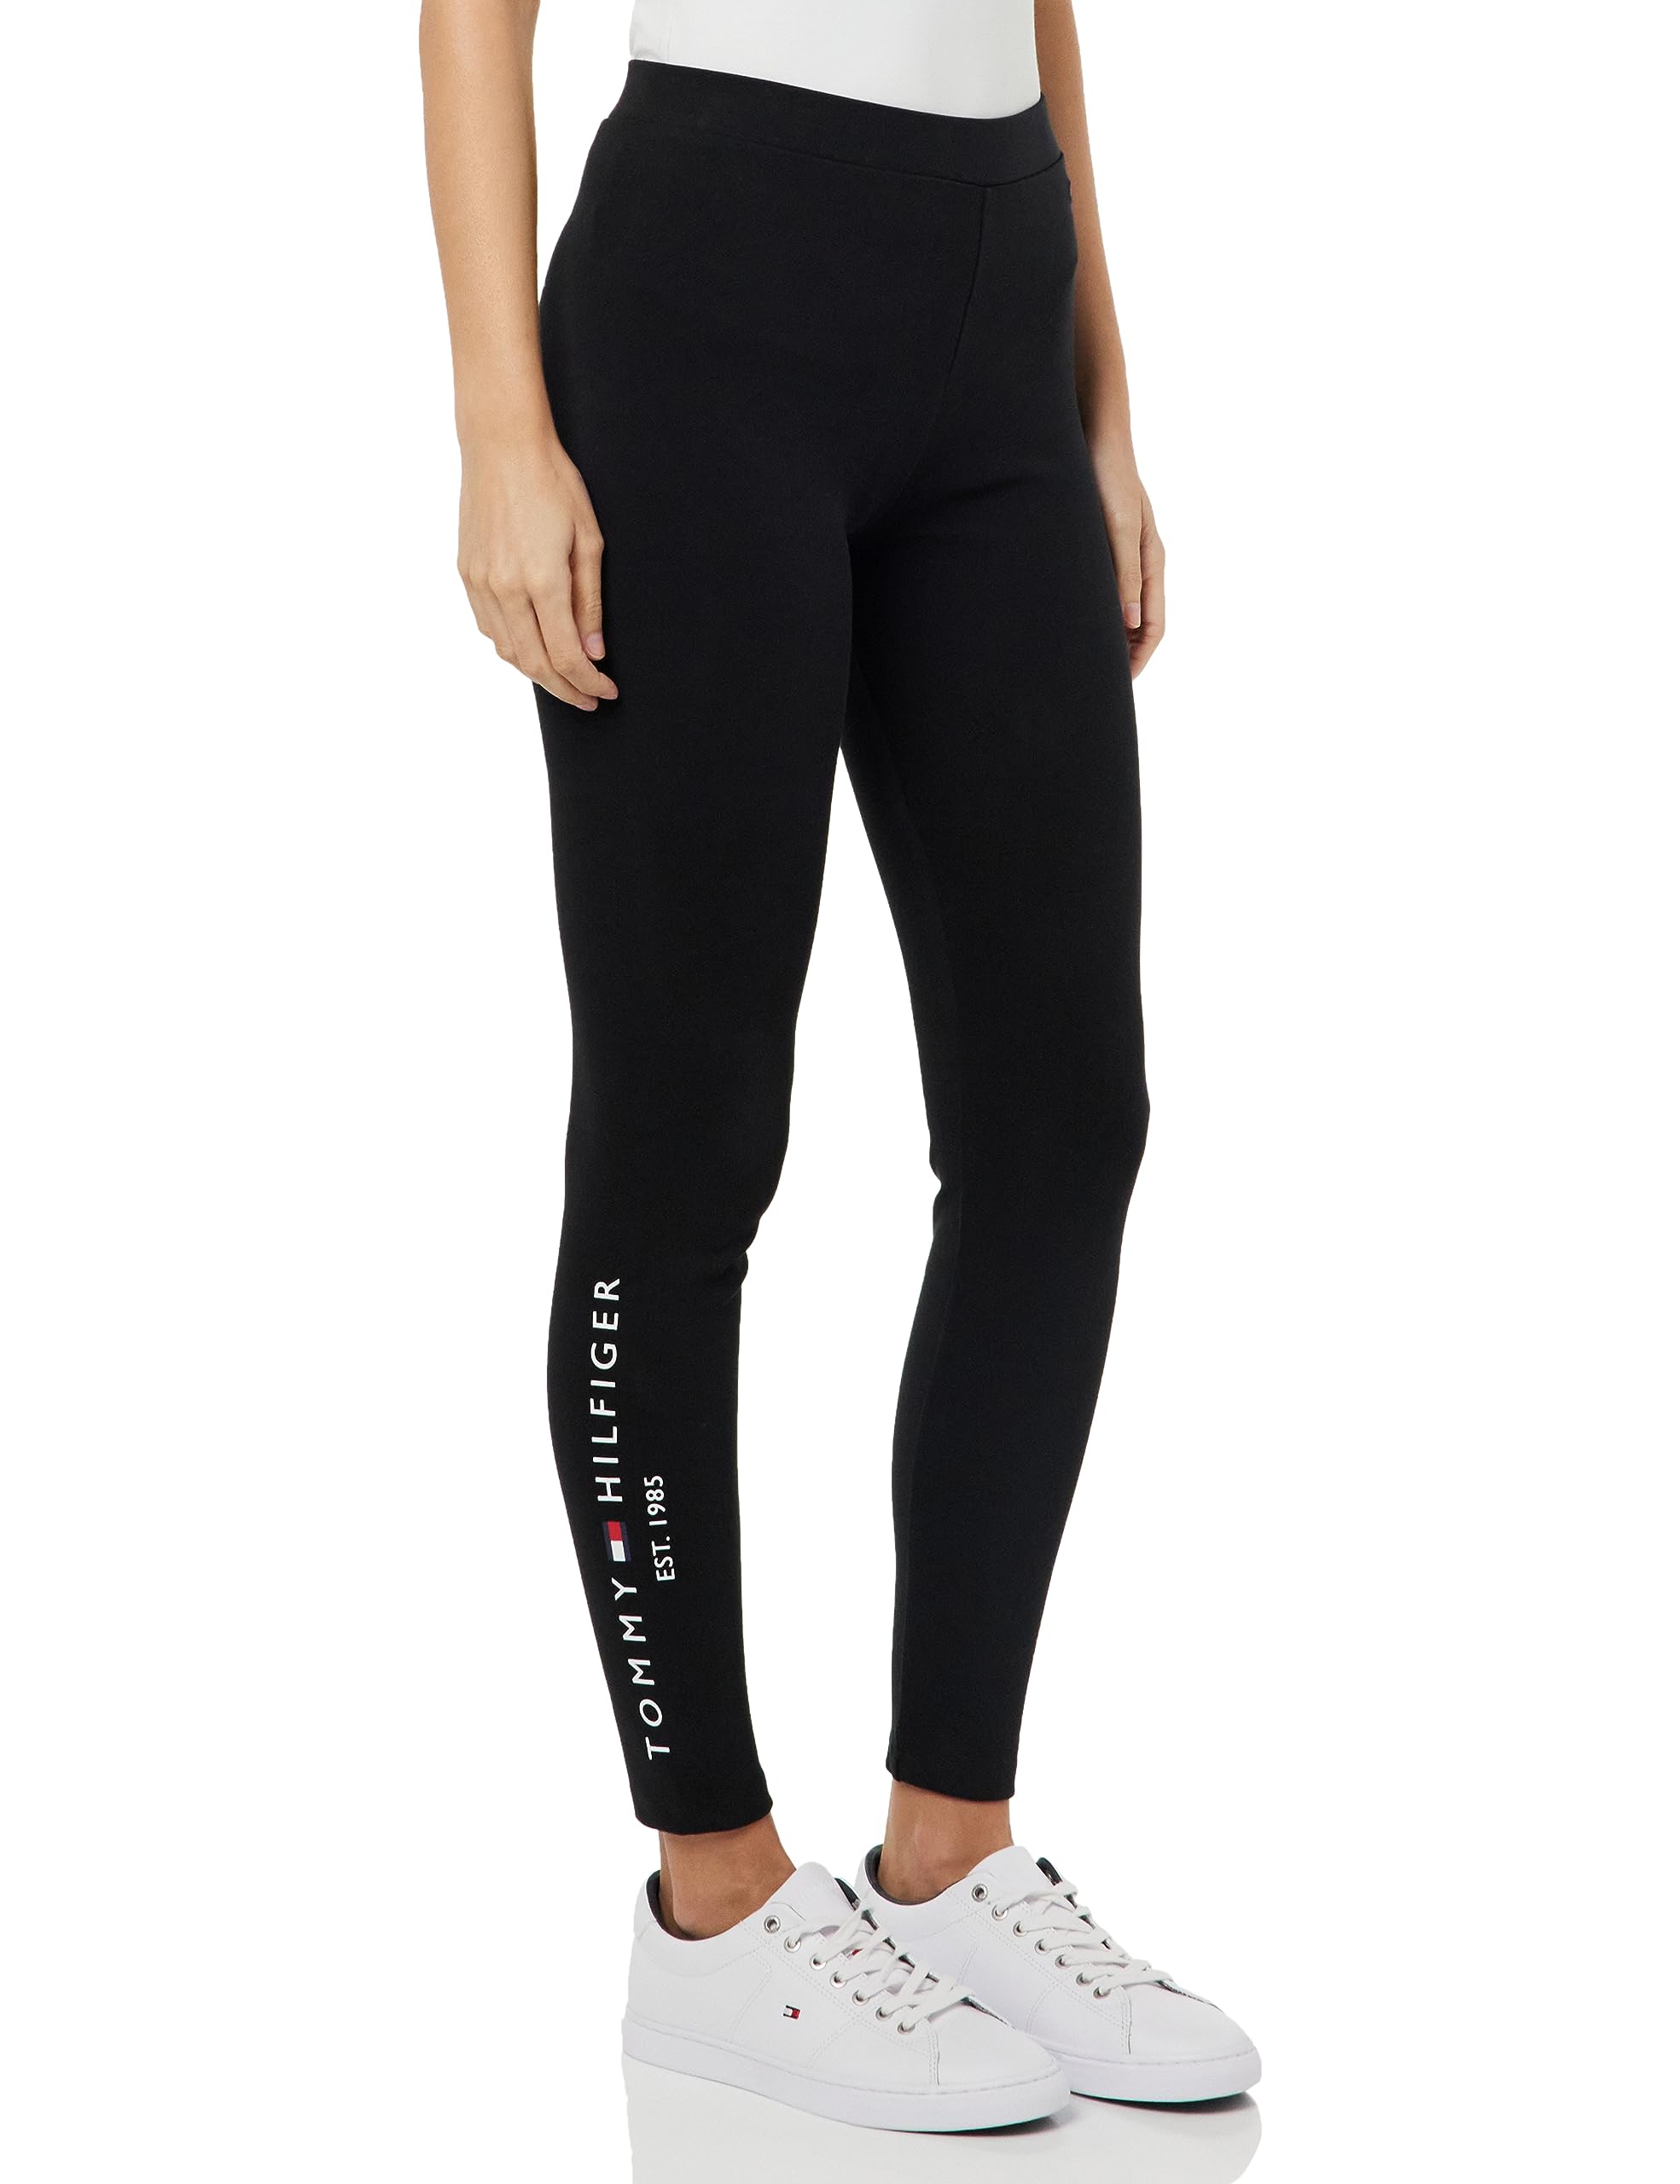 Populaire Tommy Hilfiger Leggings Femme tV188RItO grand